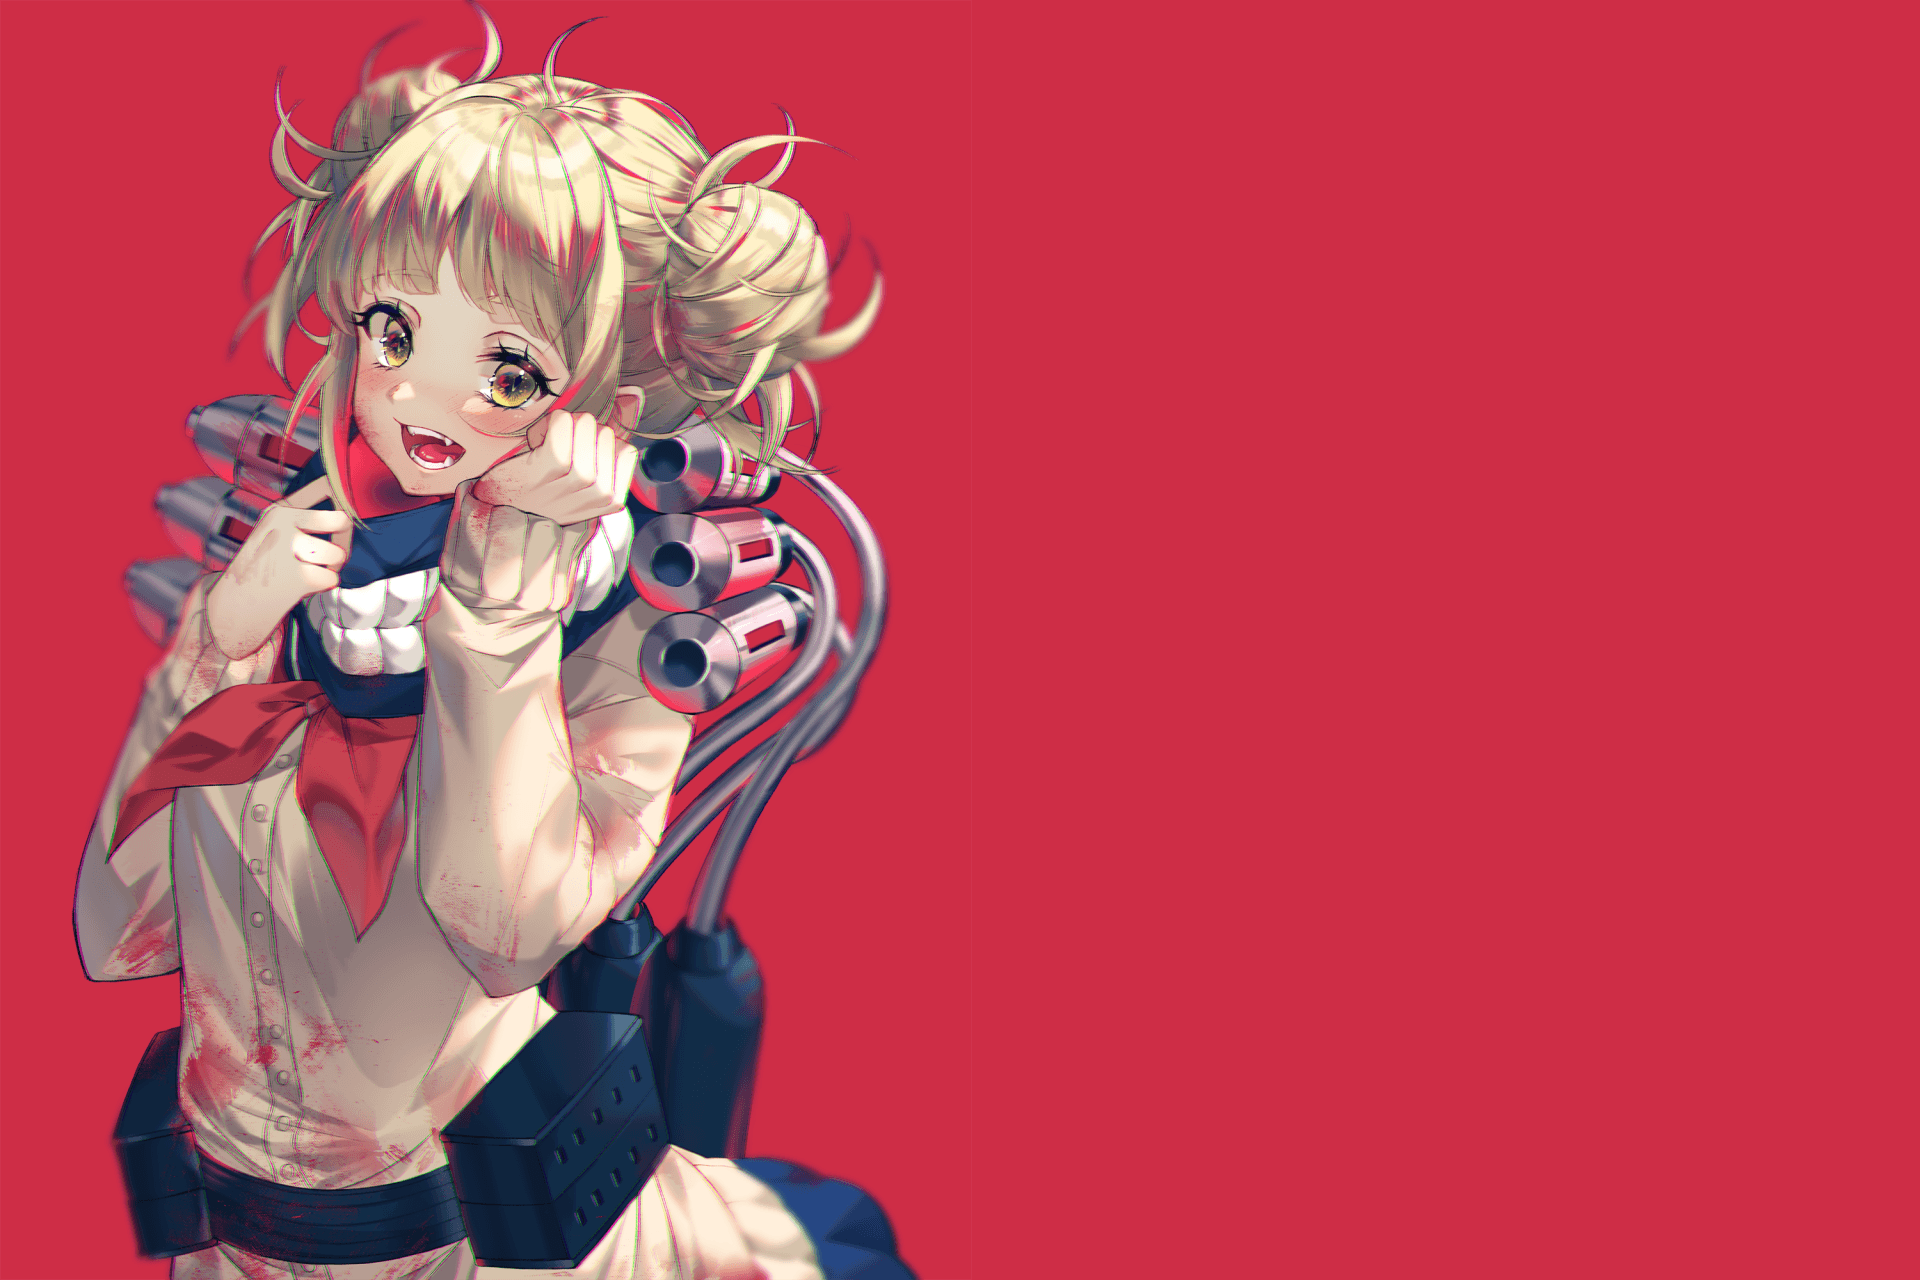 Anime Plunderer HD Wallpaper by 絹越湖超